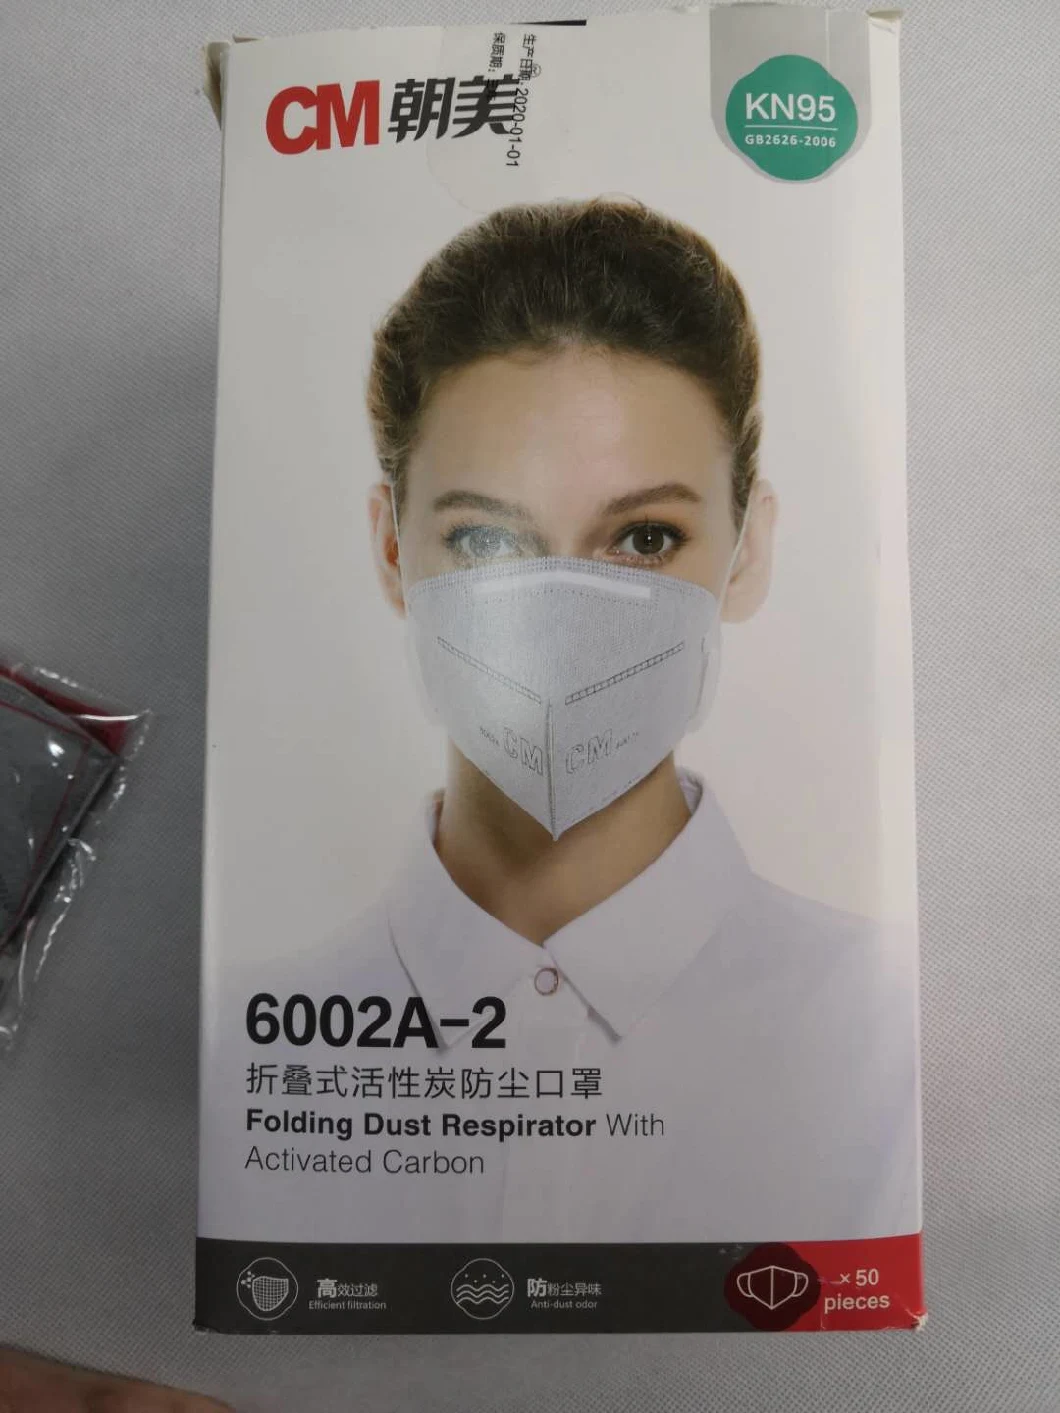 Kn95 Ffp2 Degree Personal Protection Mask with Door-to-Door Delivery